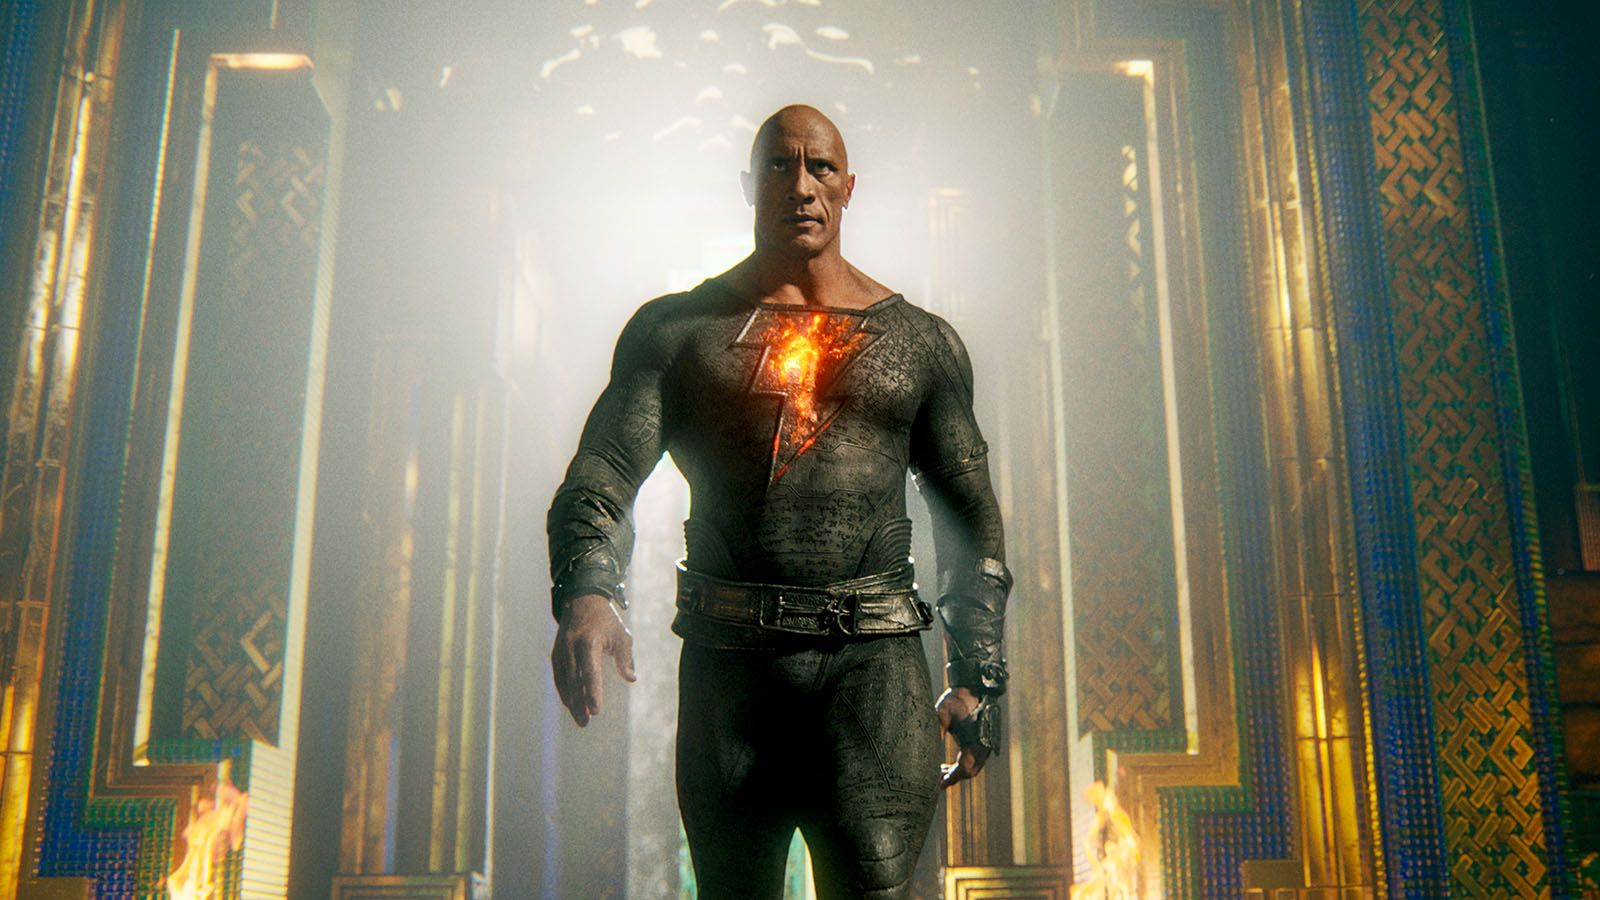 'Black Adam' held the top spot at the U.S. box office for a second straight week.